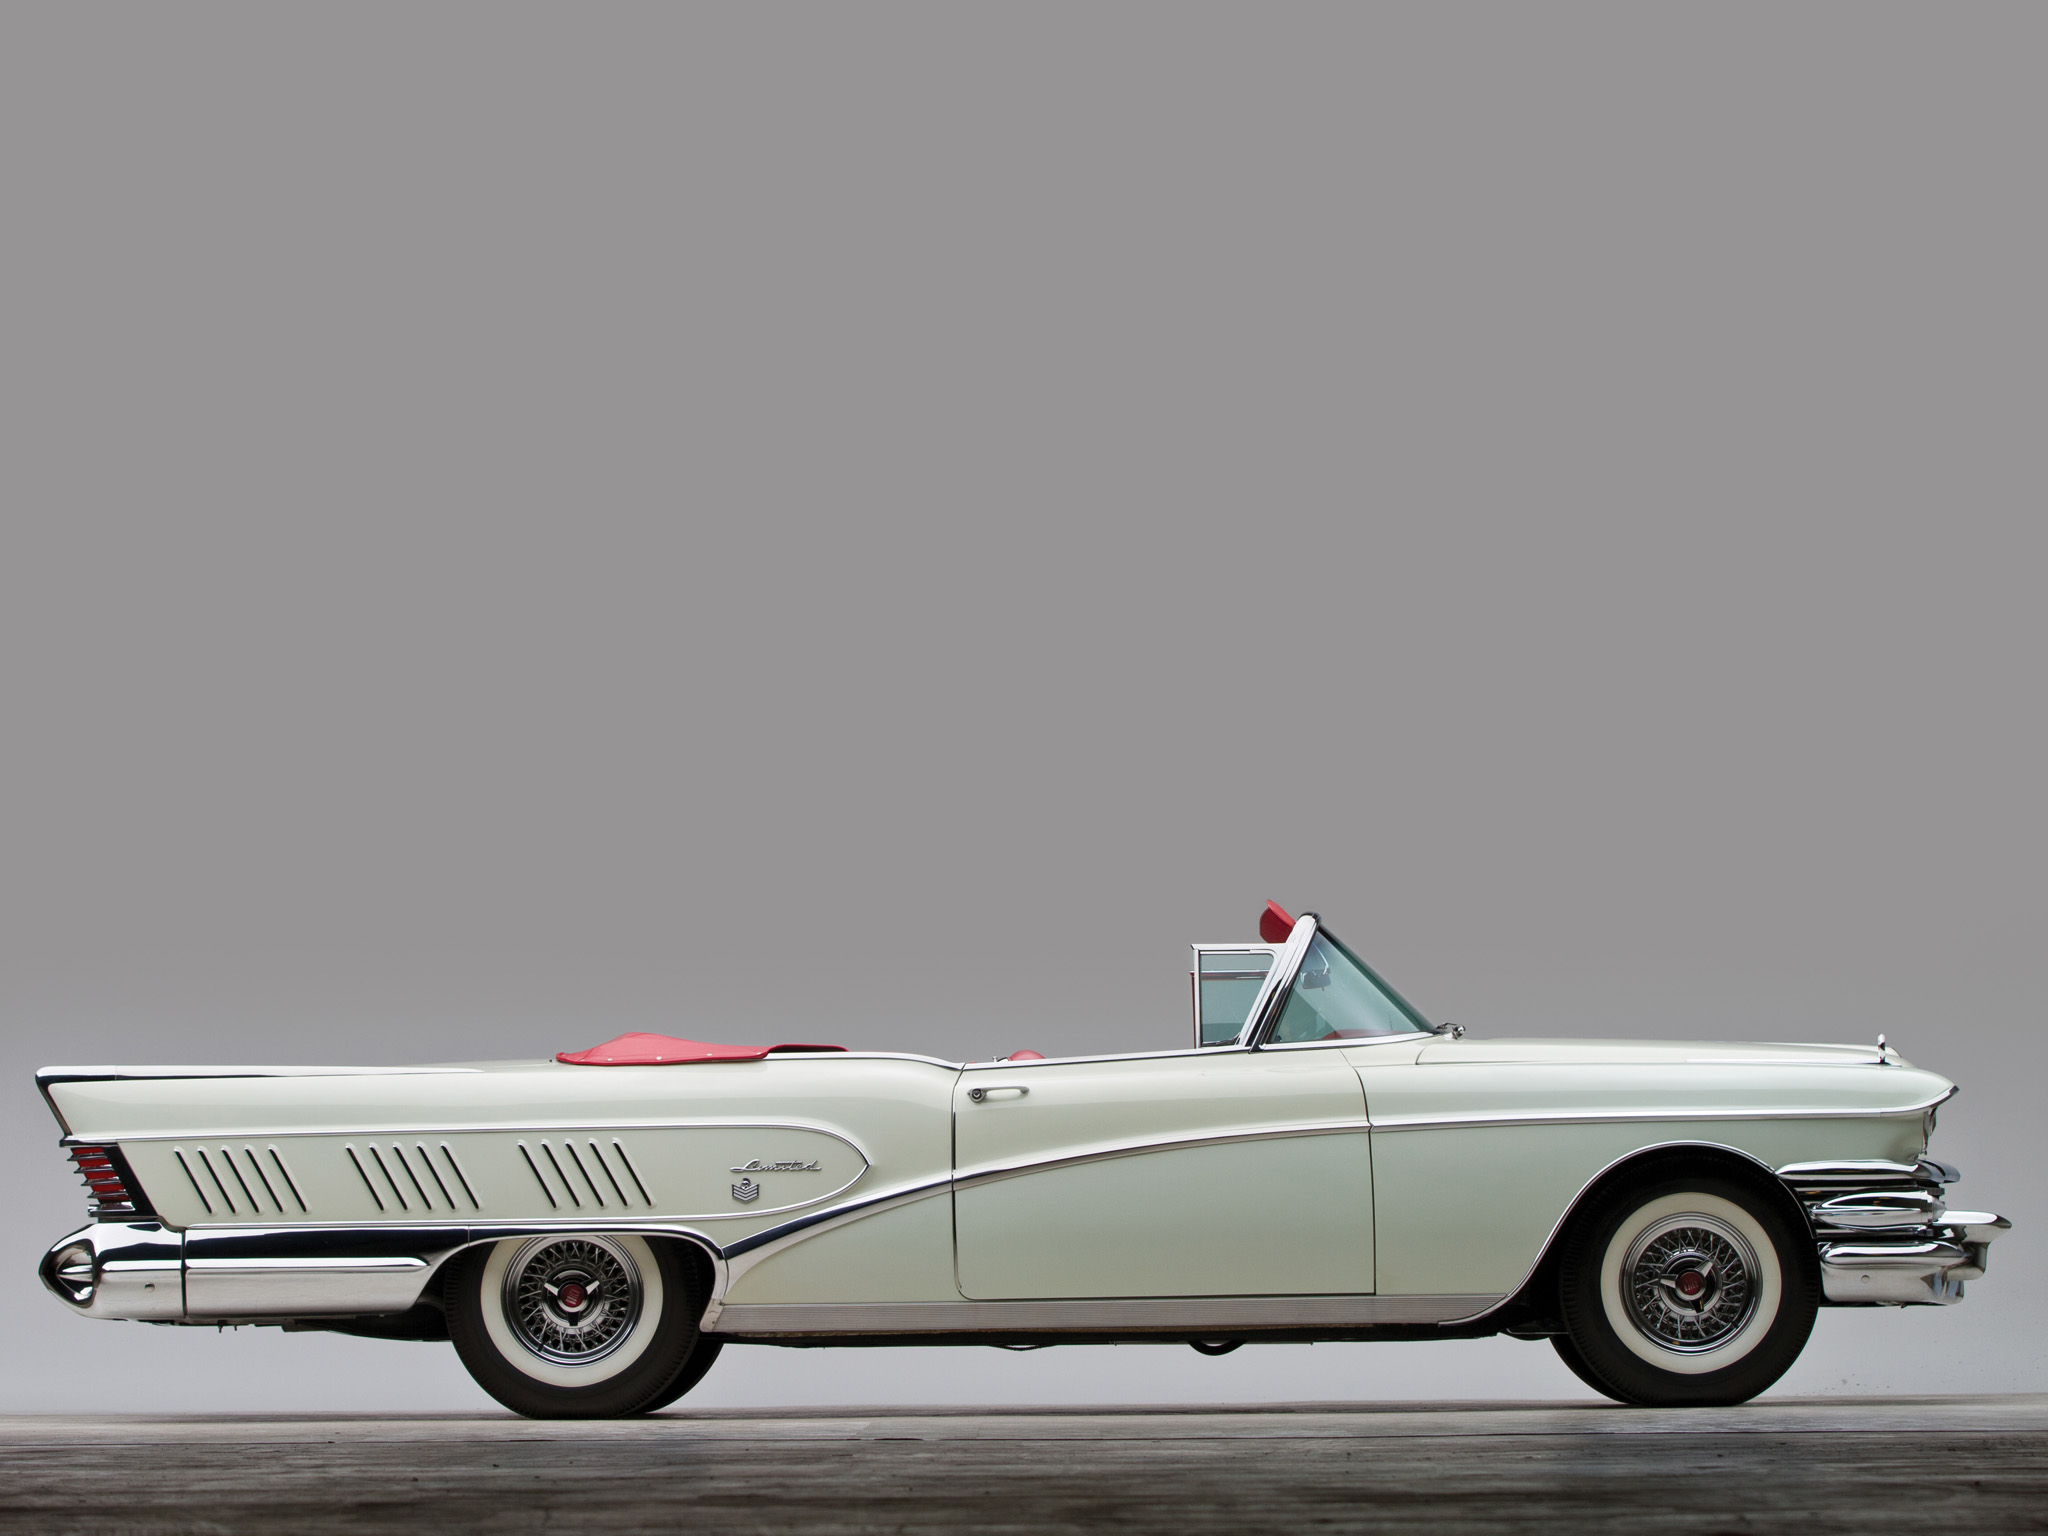 1958, Buick, Limited, Convertible,  756 4867x , Luxury, Retro Wallpaper